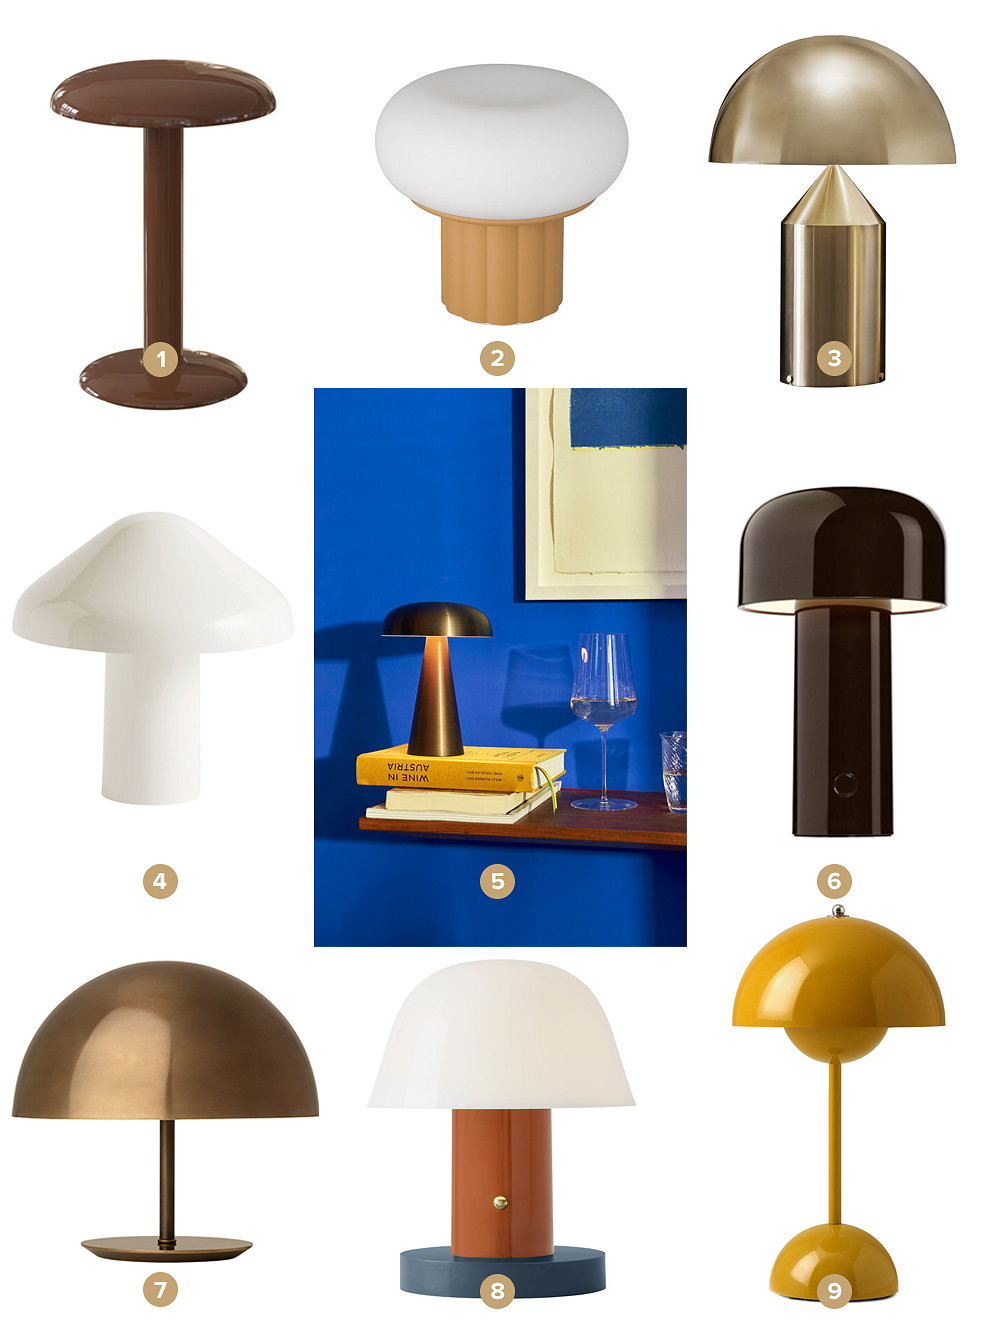 Different table lamps